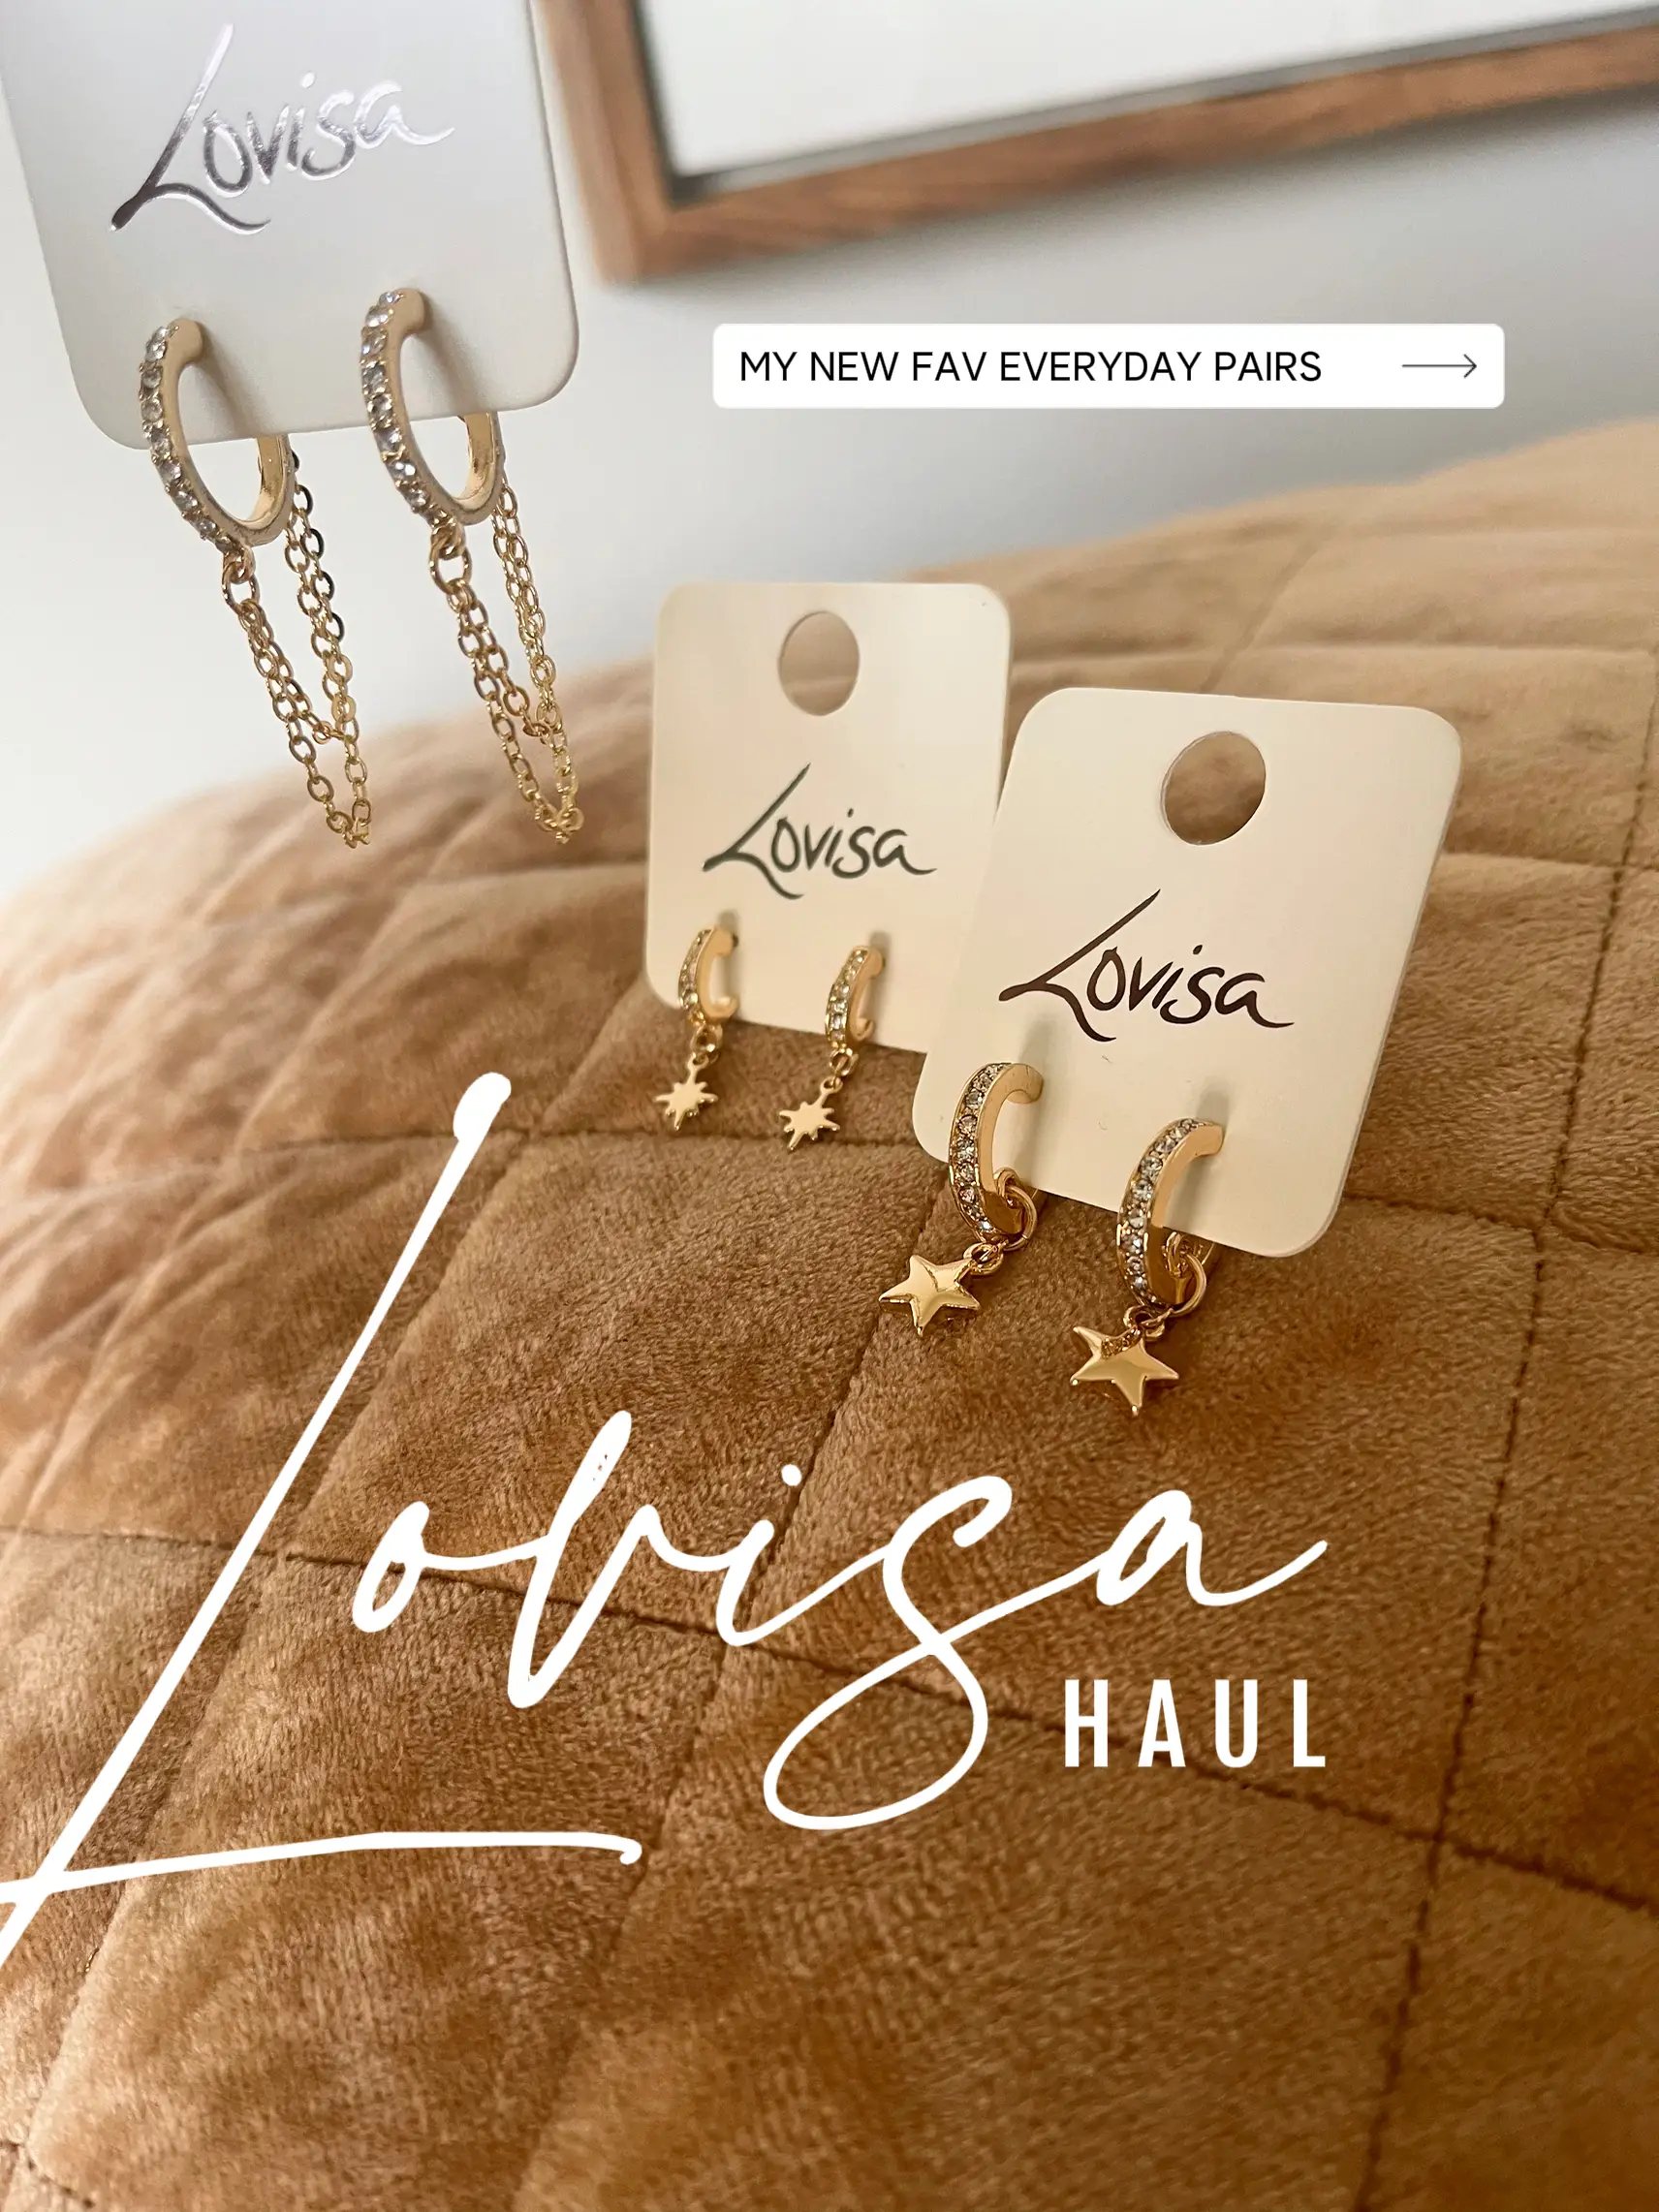 Treat yourself to trending jewellery pieces from Lovisa! Discover